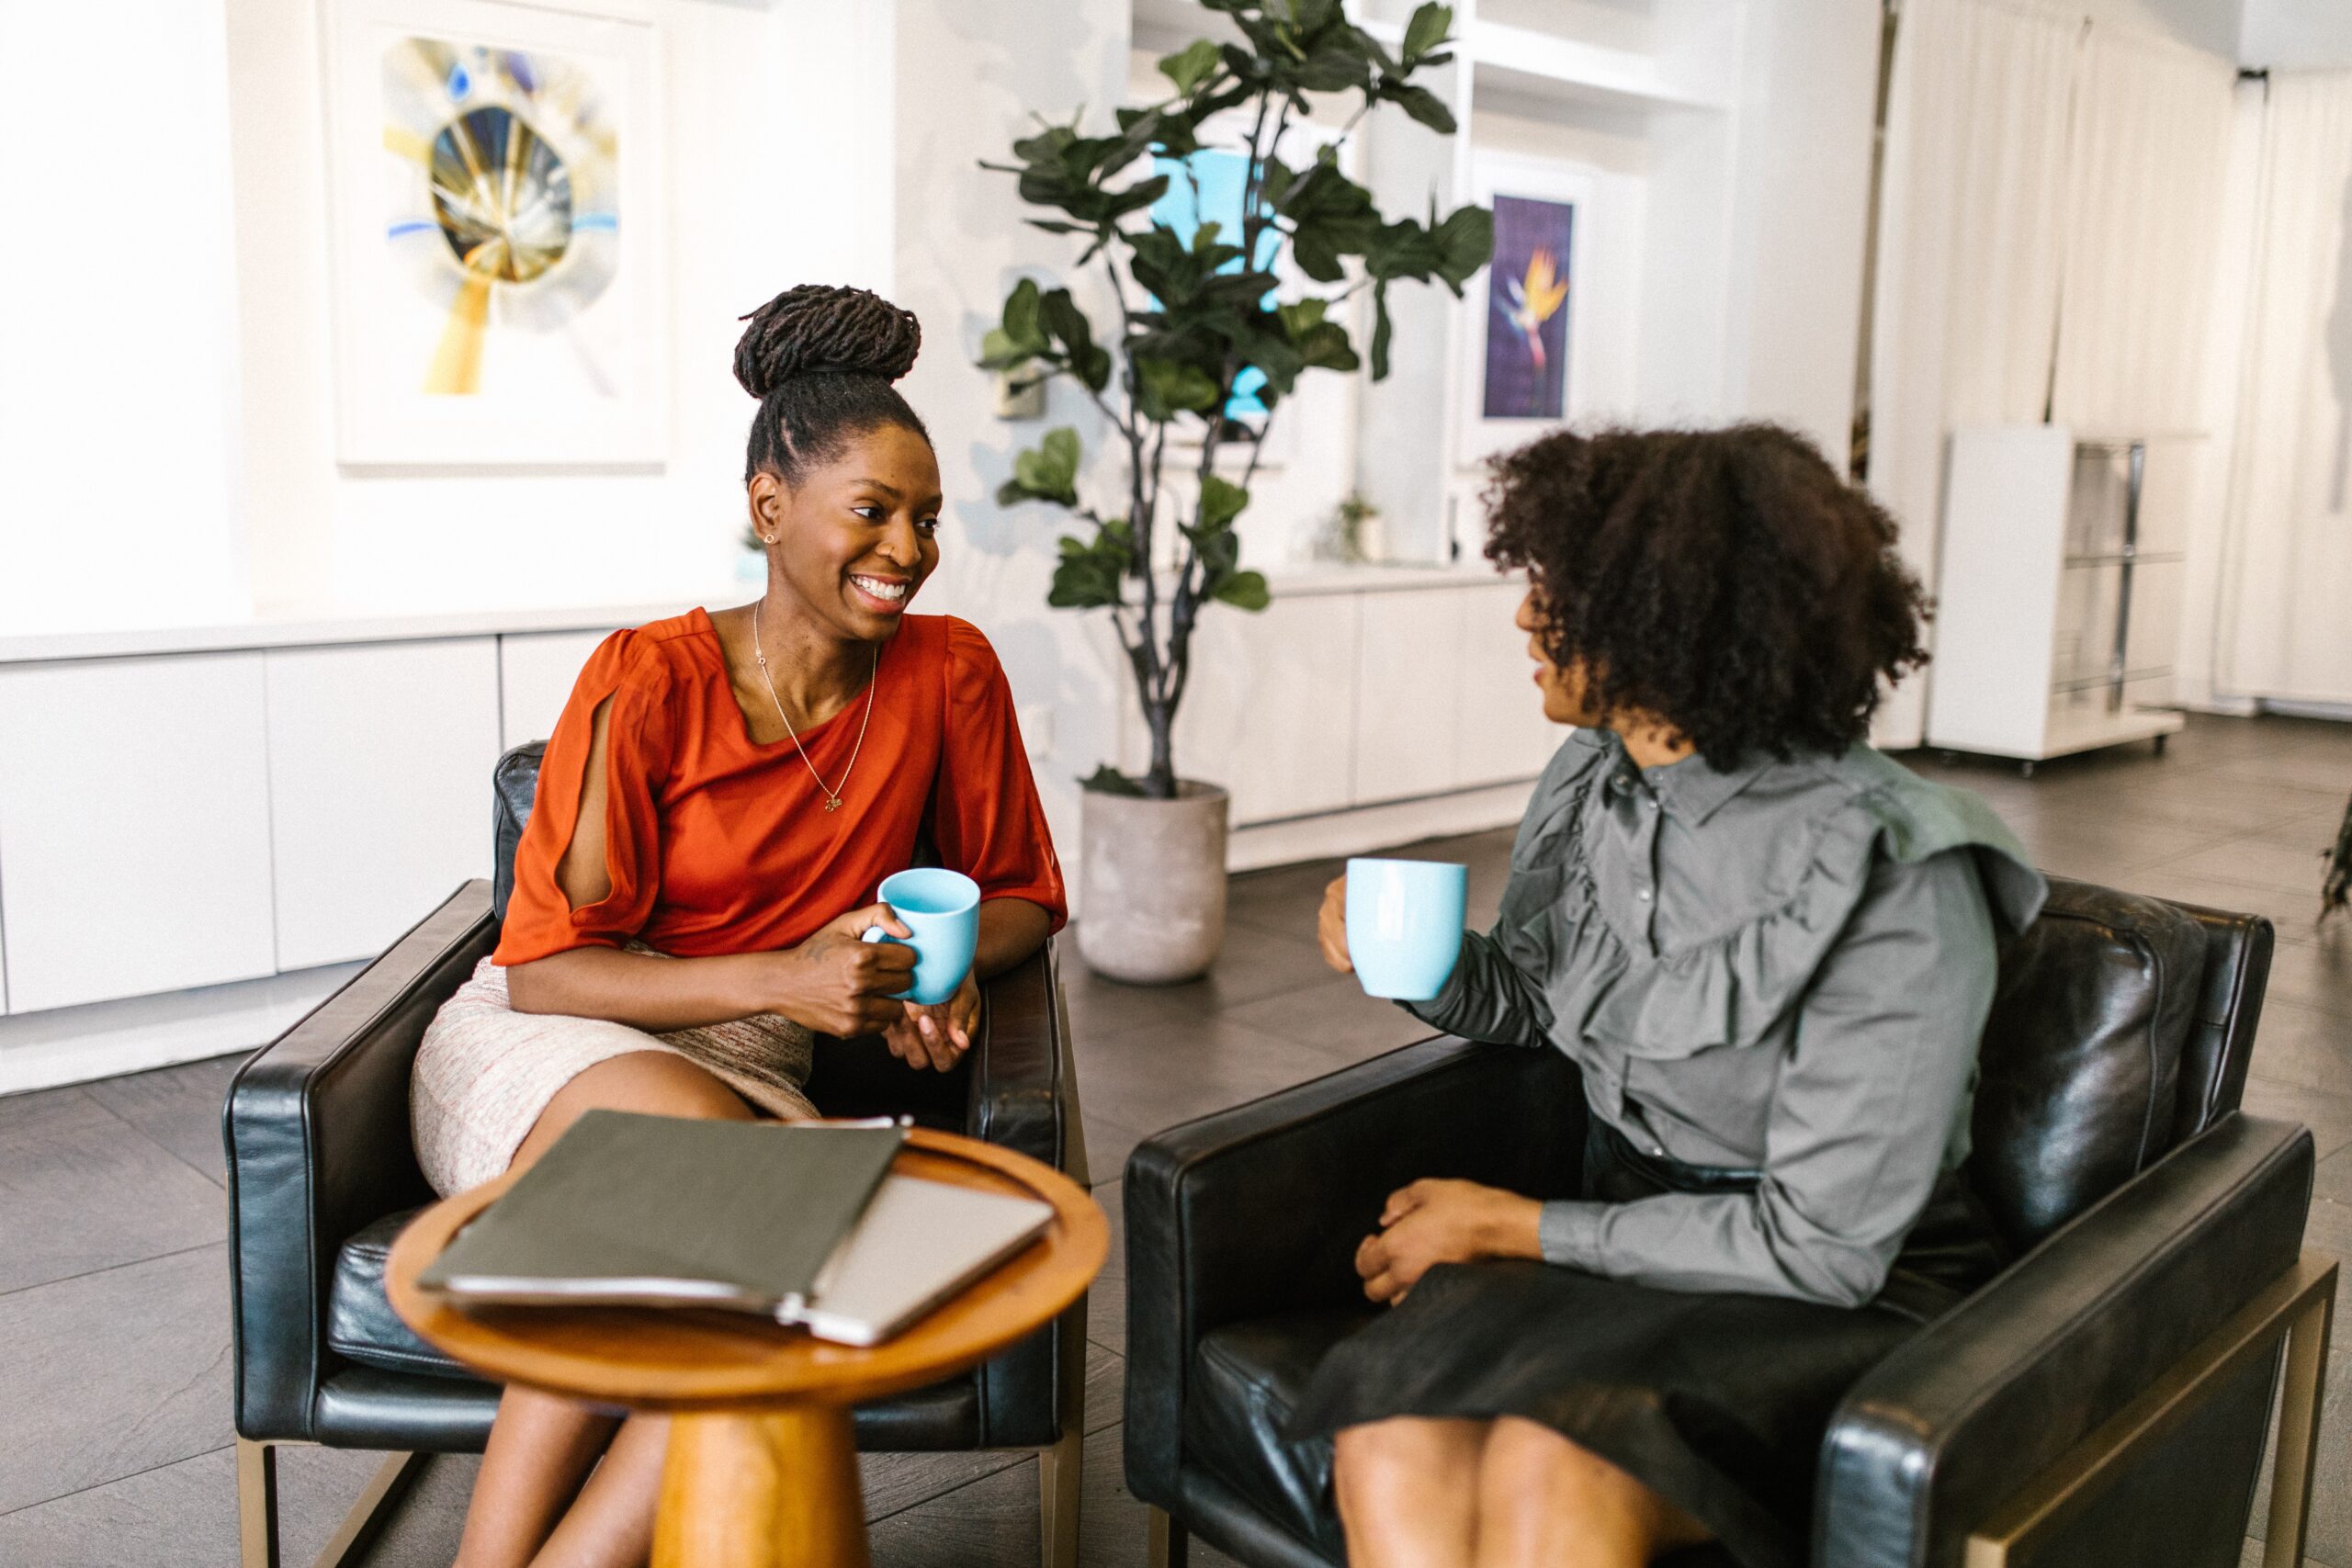 Two women sitting in mid-conversation with smiles, holding coffee cups in an office setting.